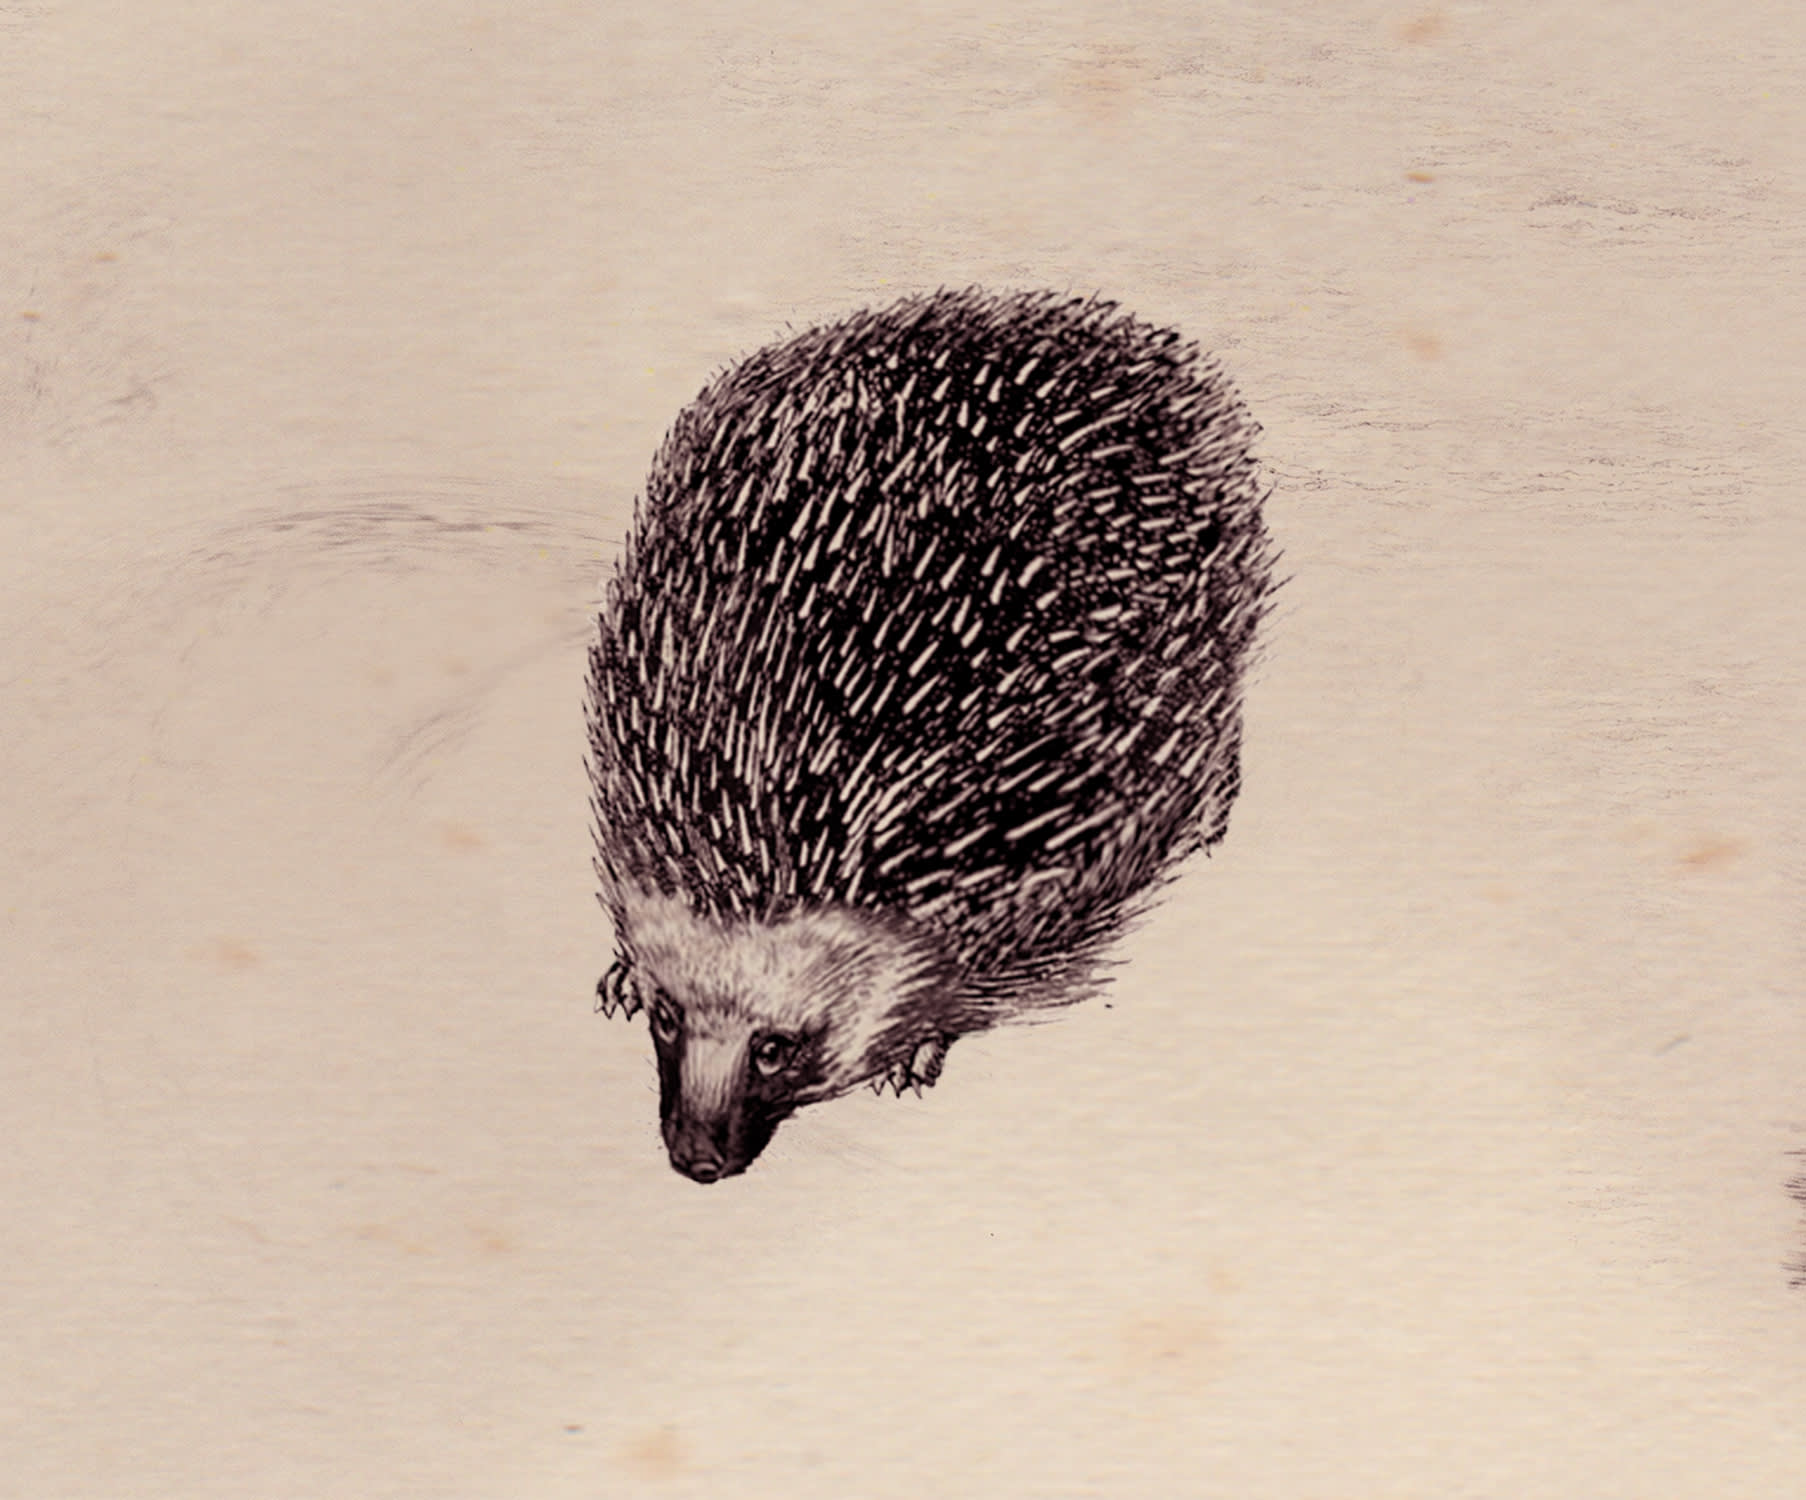 A magical creature almost totally indistinguishable from a hedgehog